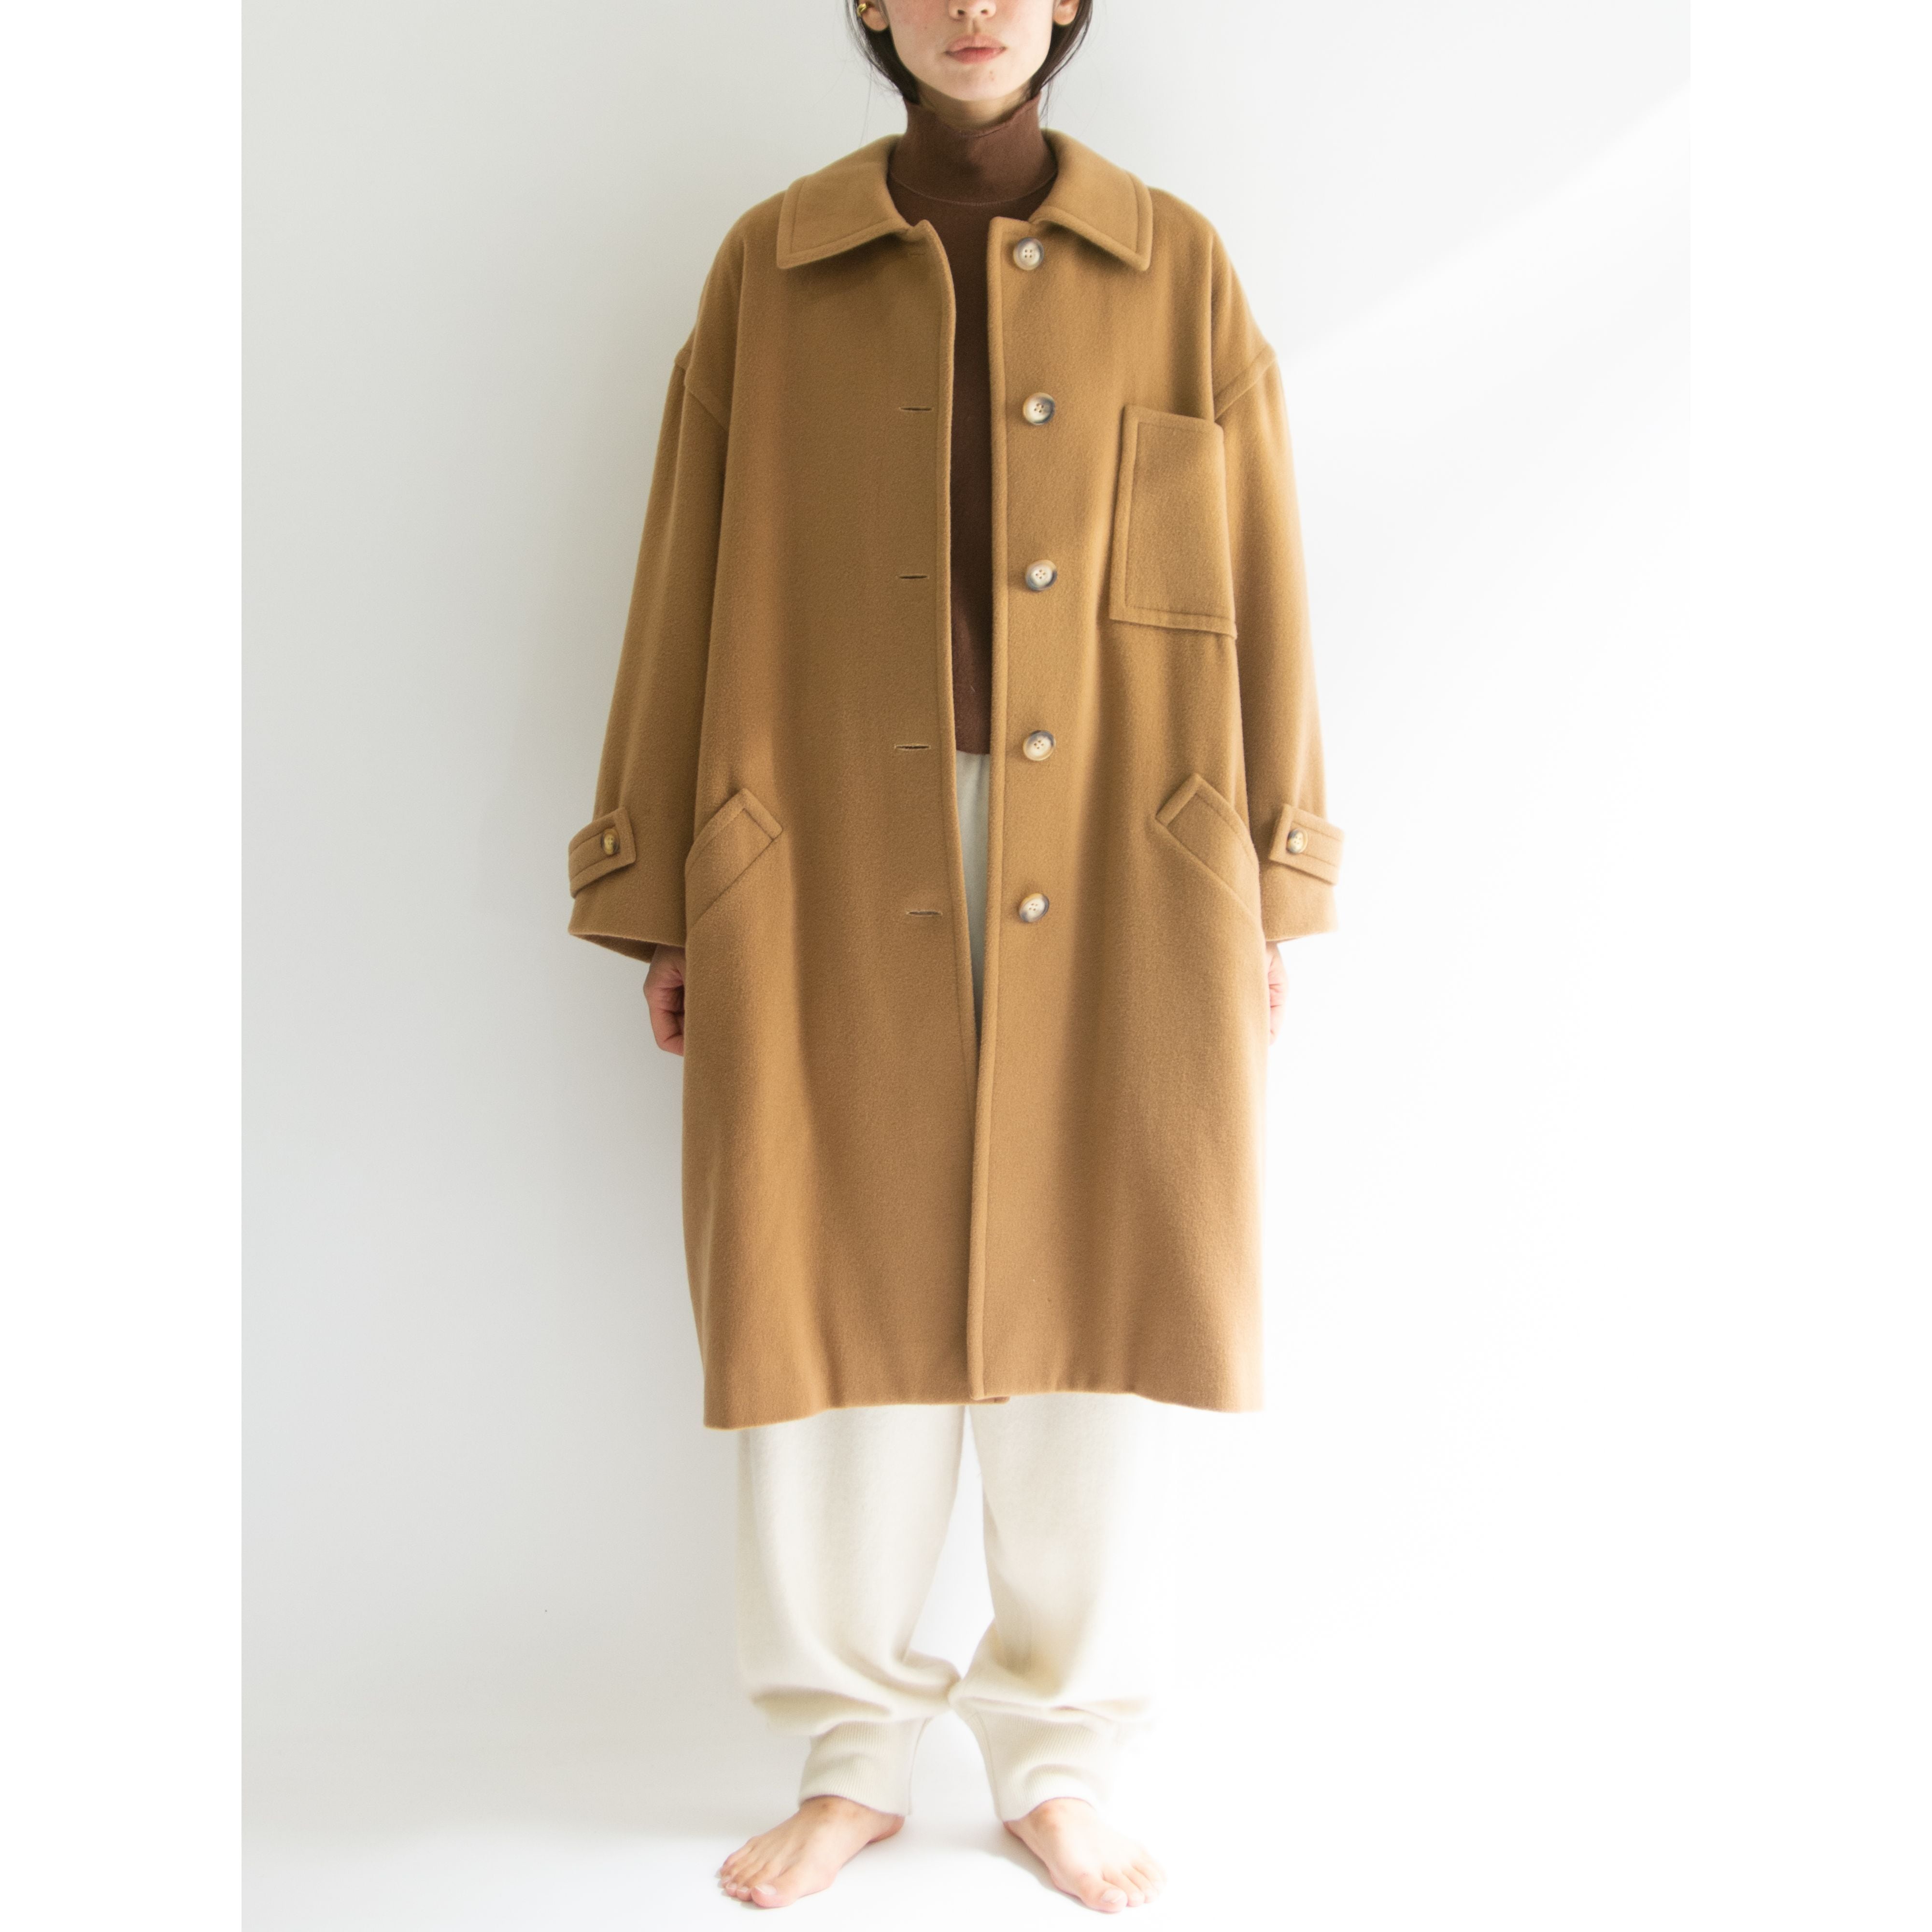 HANAE MORI PARIS】Made in France 80-90's Cashmere-Wool Oversized 